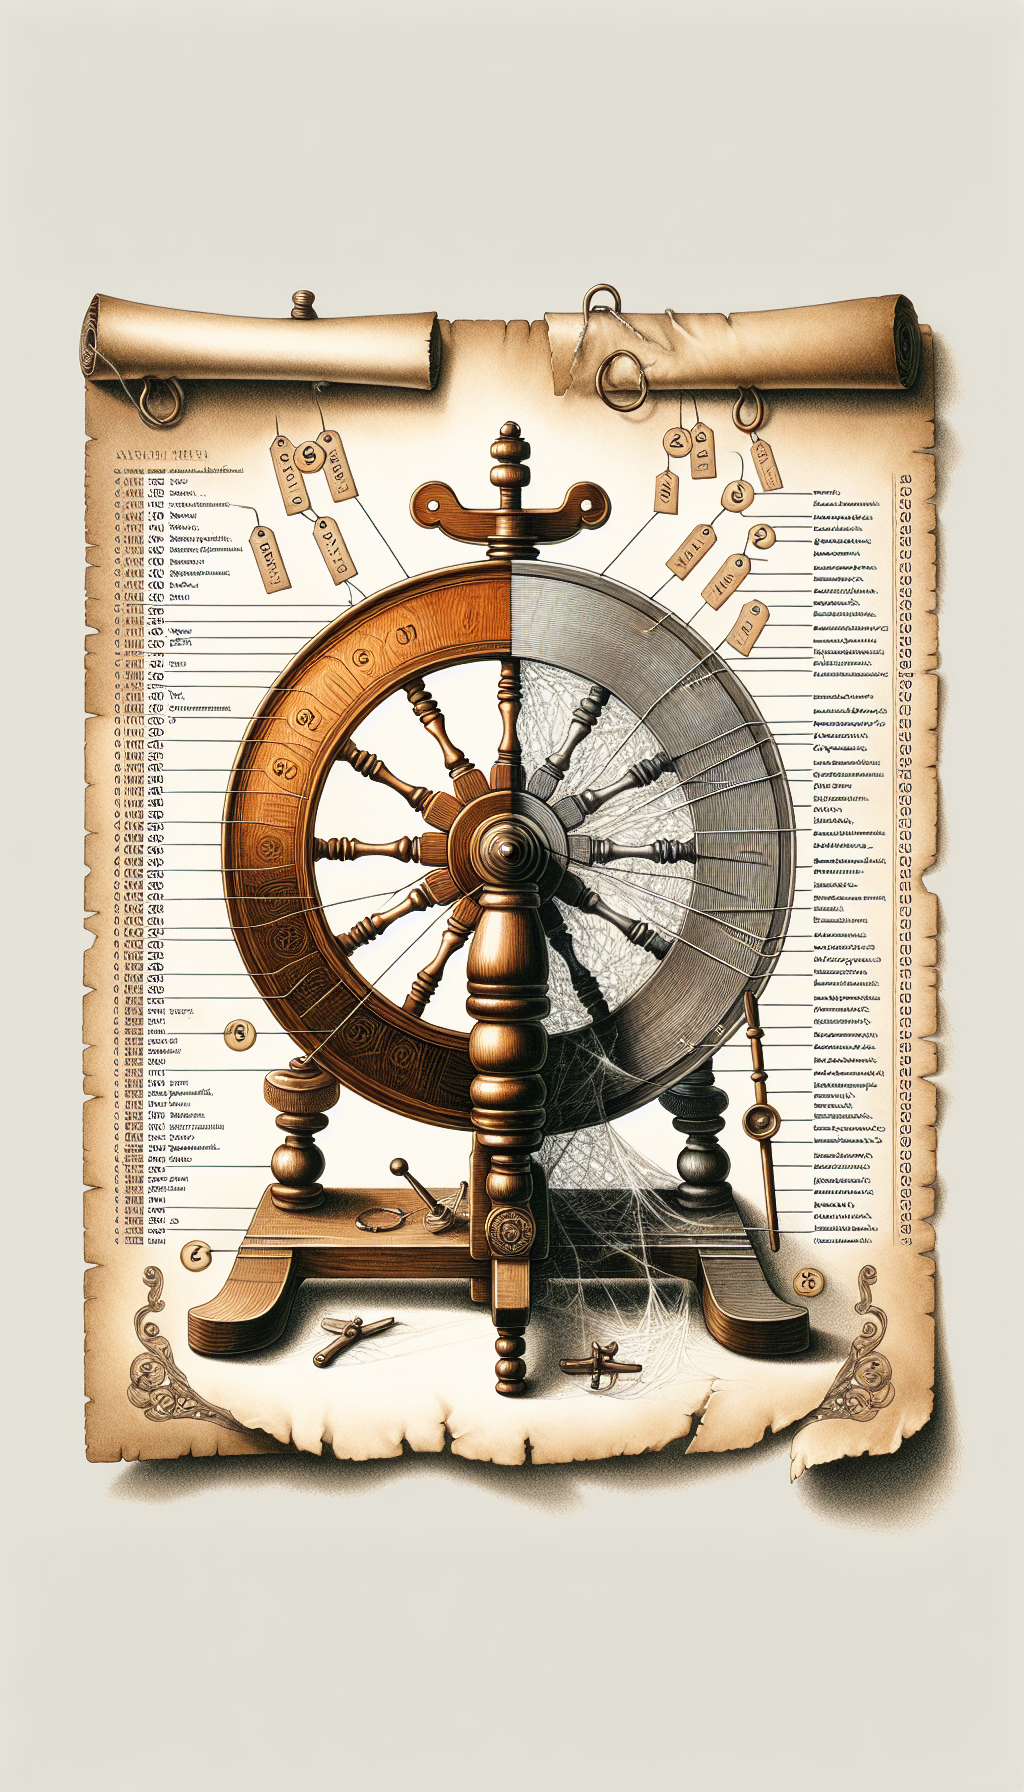 An intricately detailed illustration showcases a half-restored spinning wheel where one side gleams with polished wood and gleaming brass fittings, while the other remains timeworn and cobwebbed. Tiny numbered tags hang off key features (like the flyer, wheel, and treadle) leading to a faded scroll at the bottom, listing identifying characteristics and time periods, symbolizing a blend of conservation and detective work.